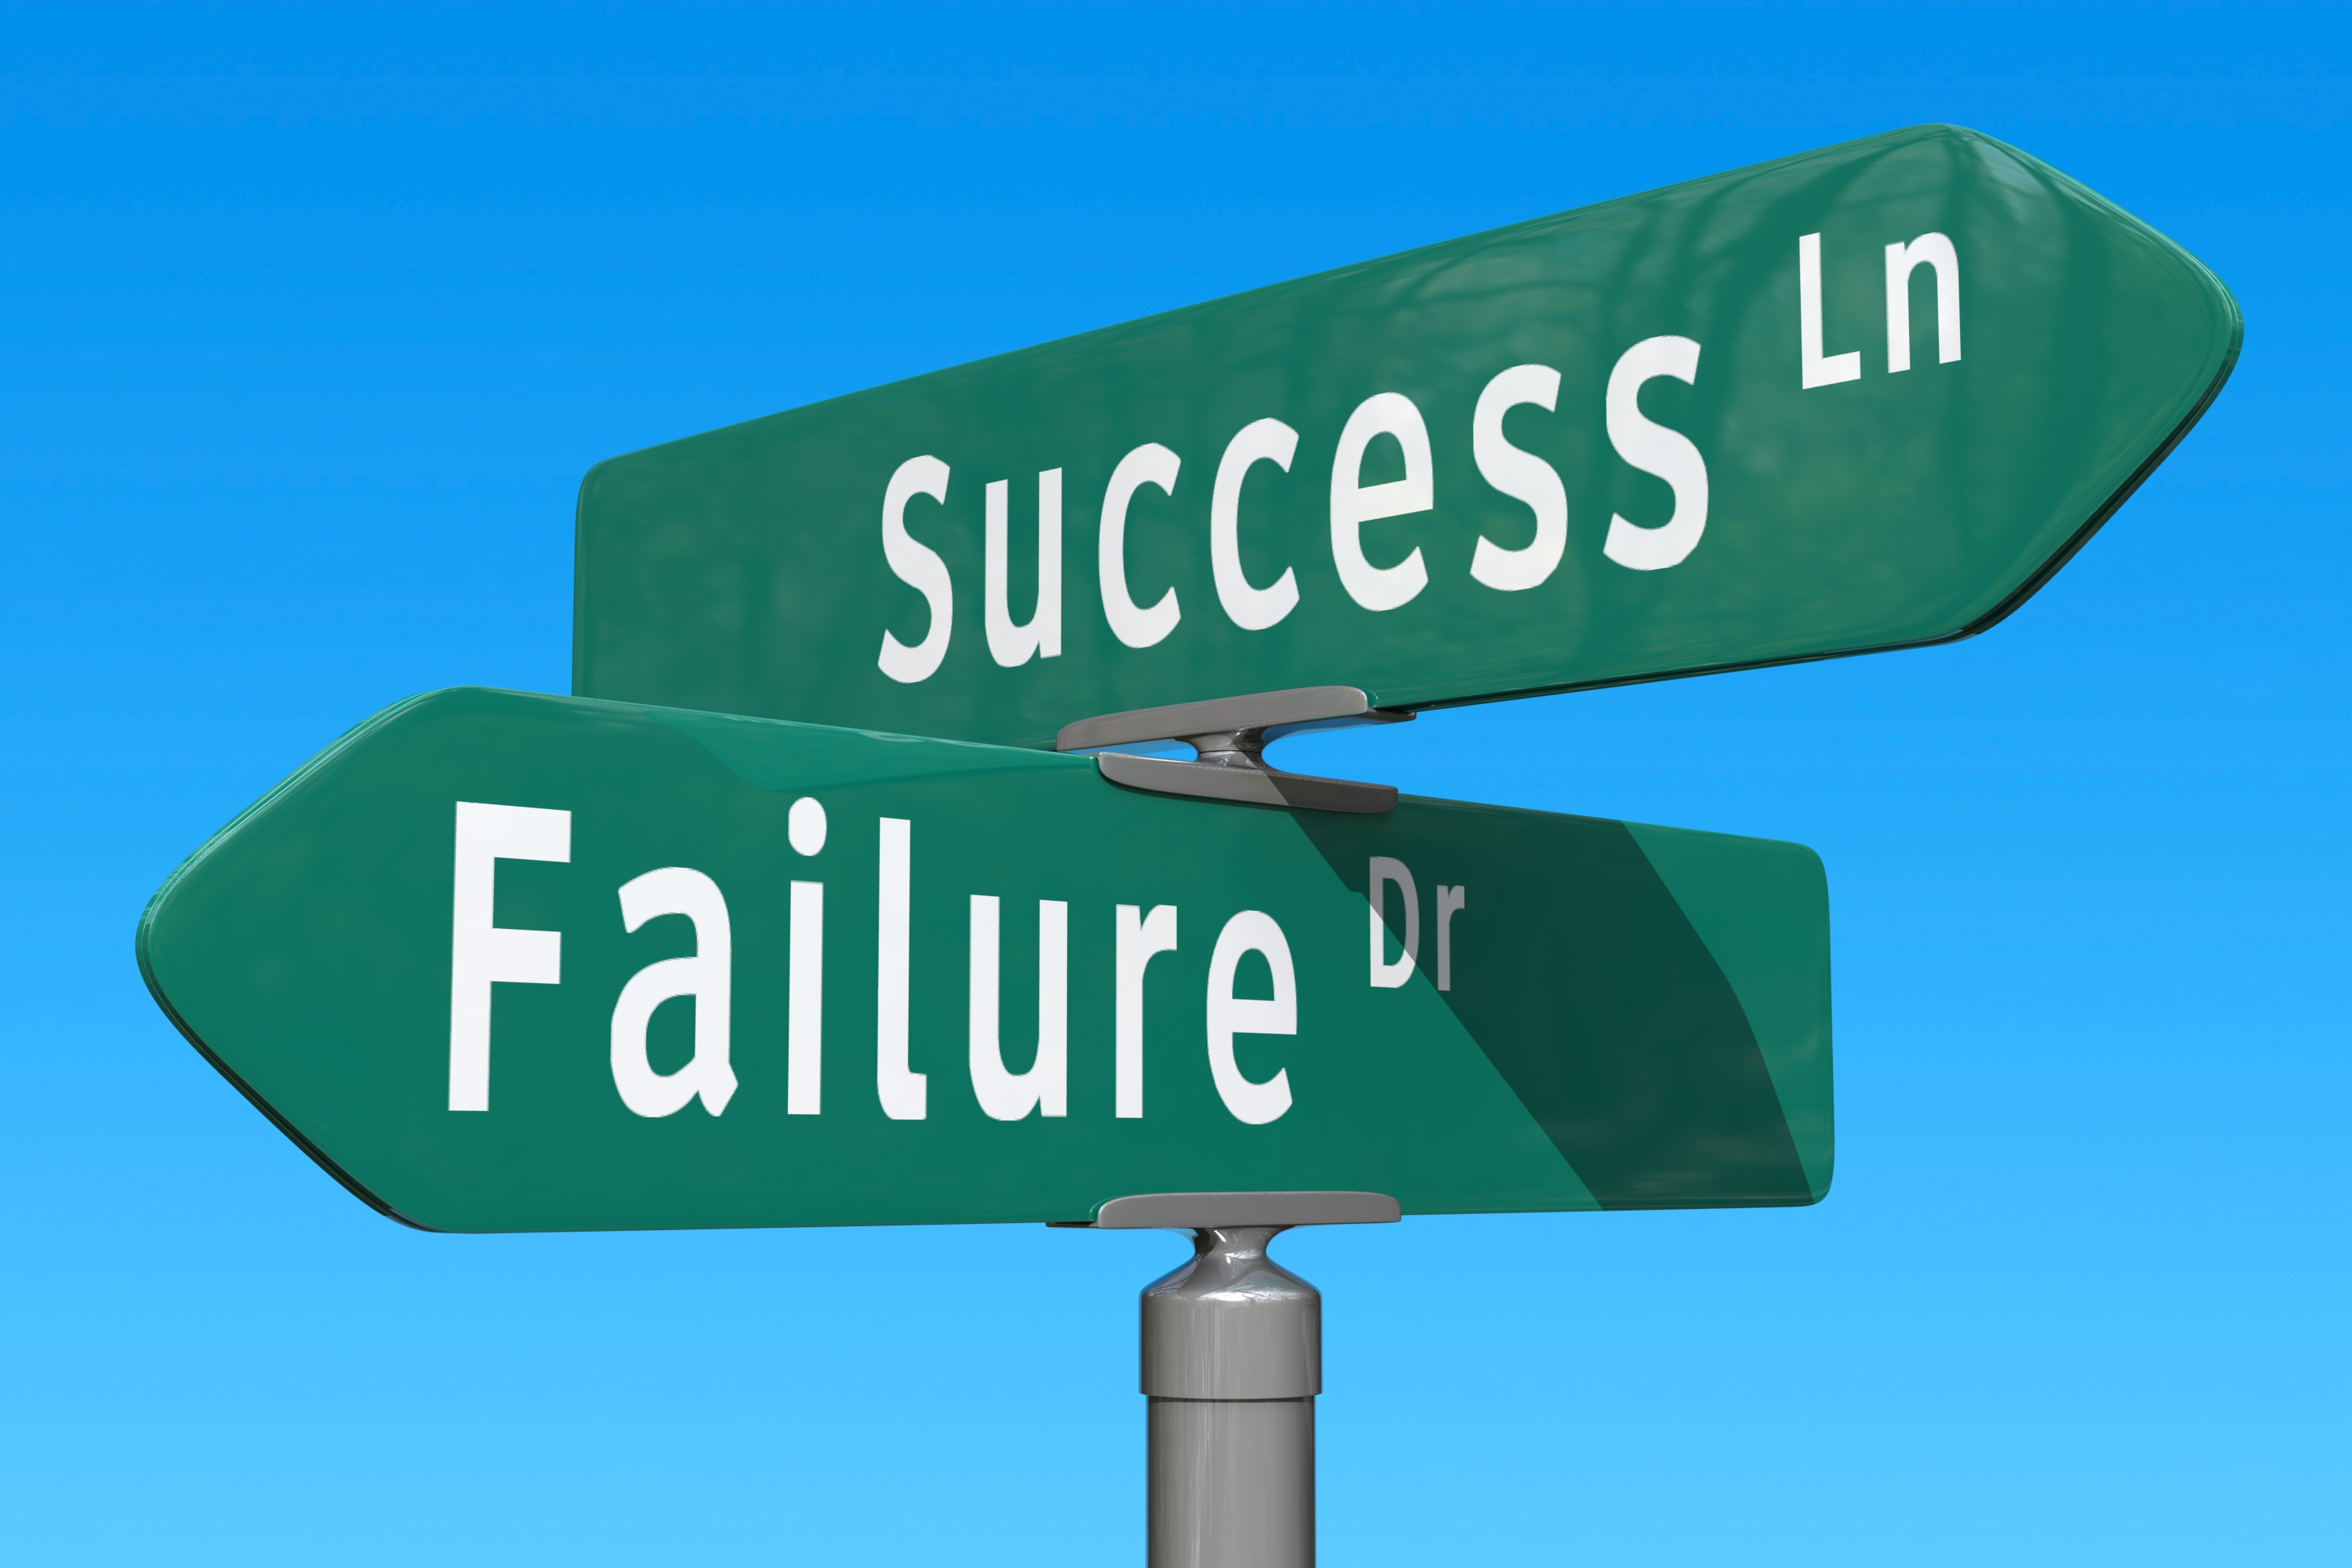 When failure becomes a mark of success